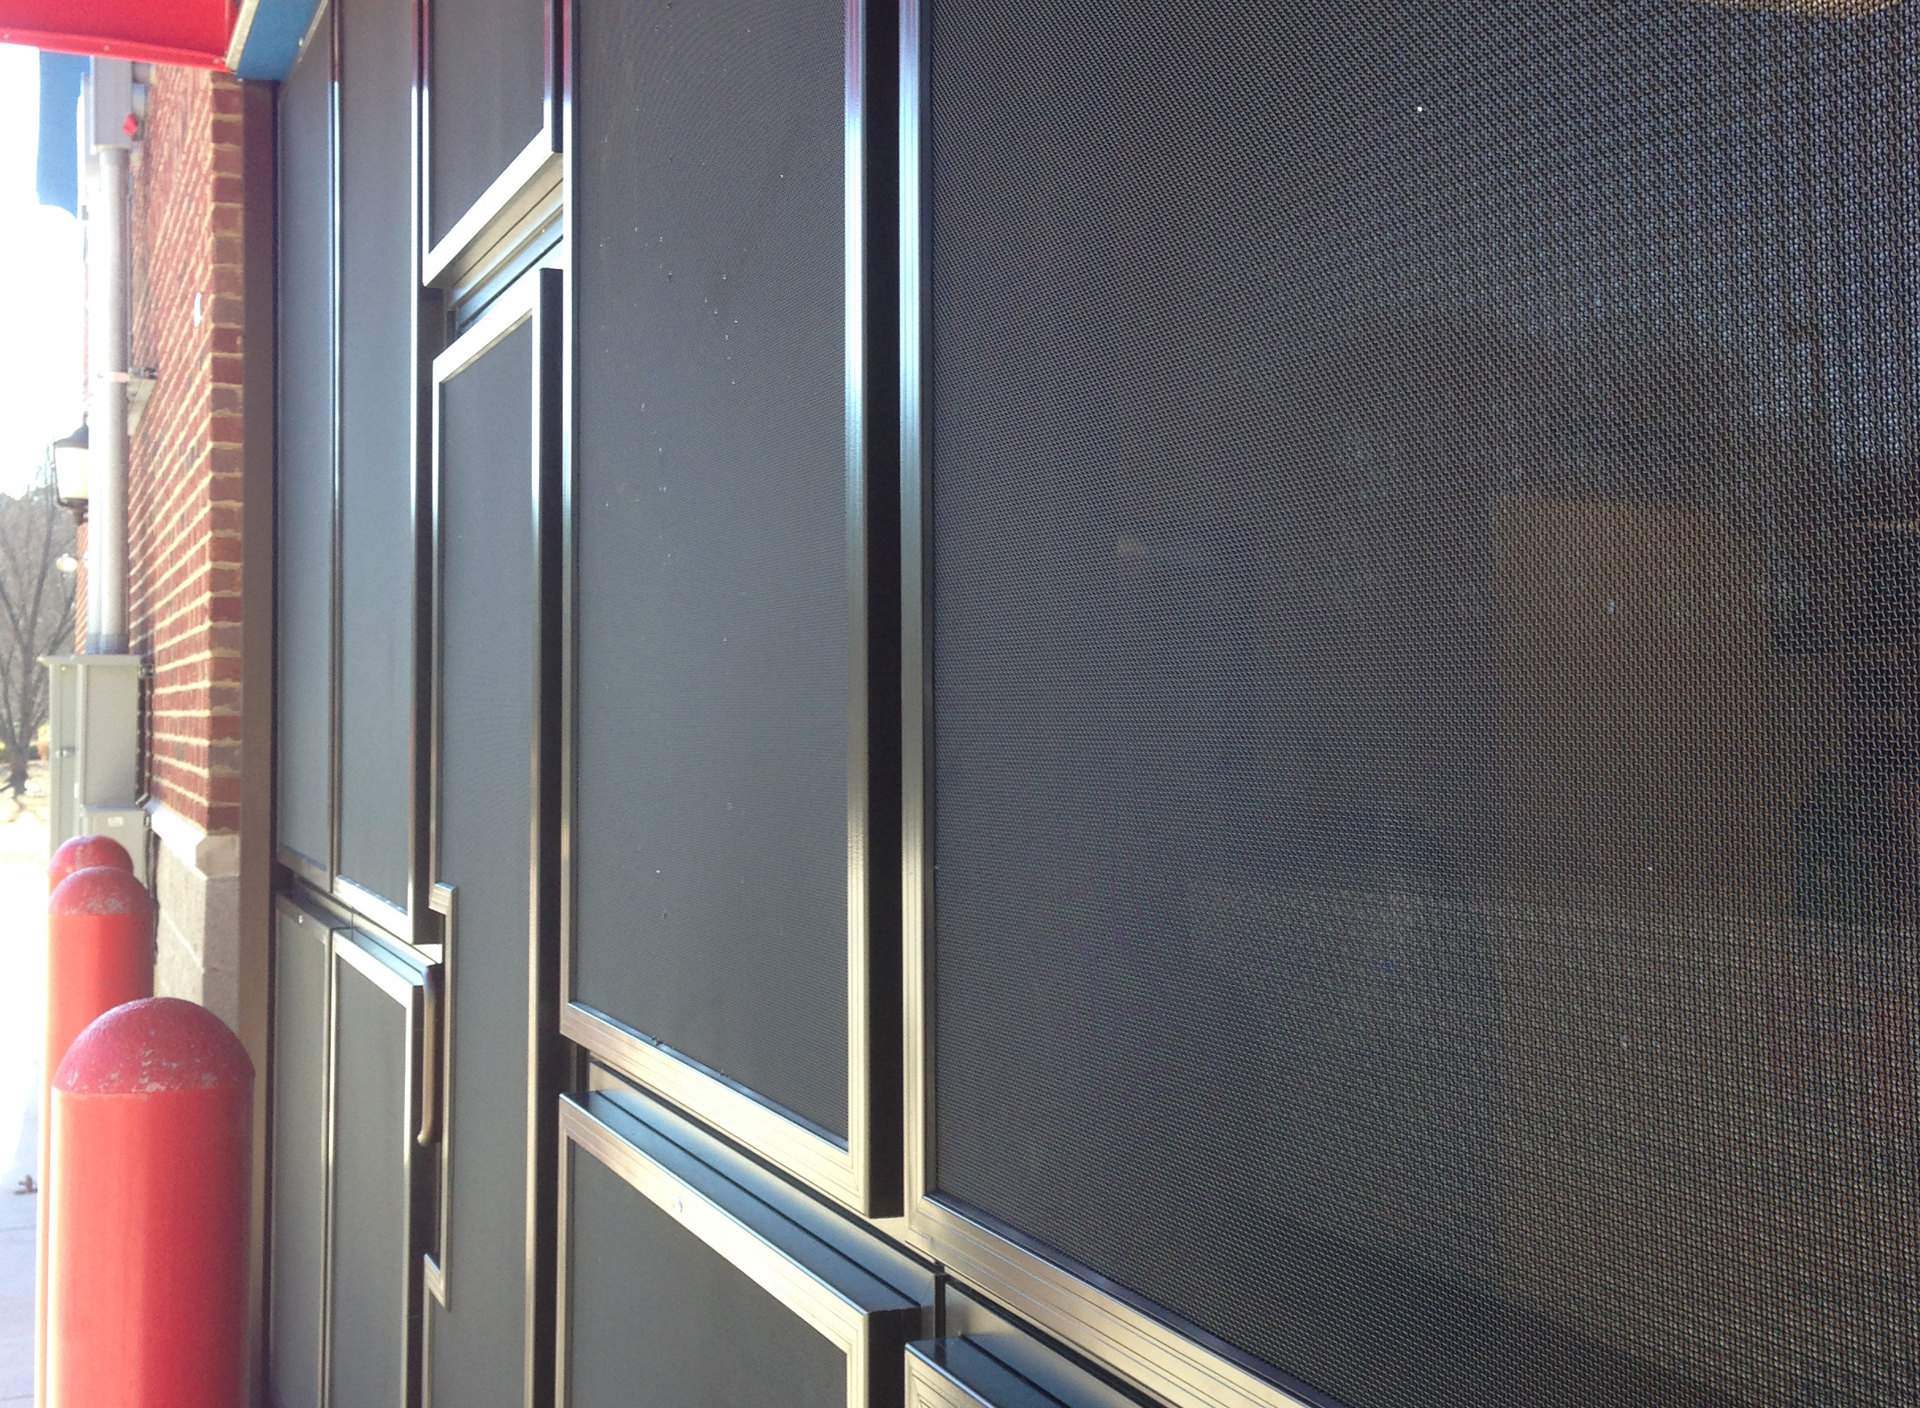 Contact us for the latest in home and business door, window and pation security screens.